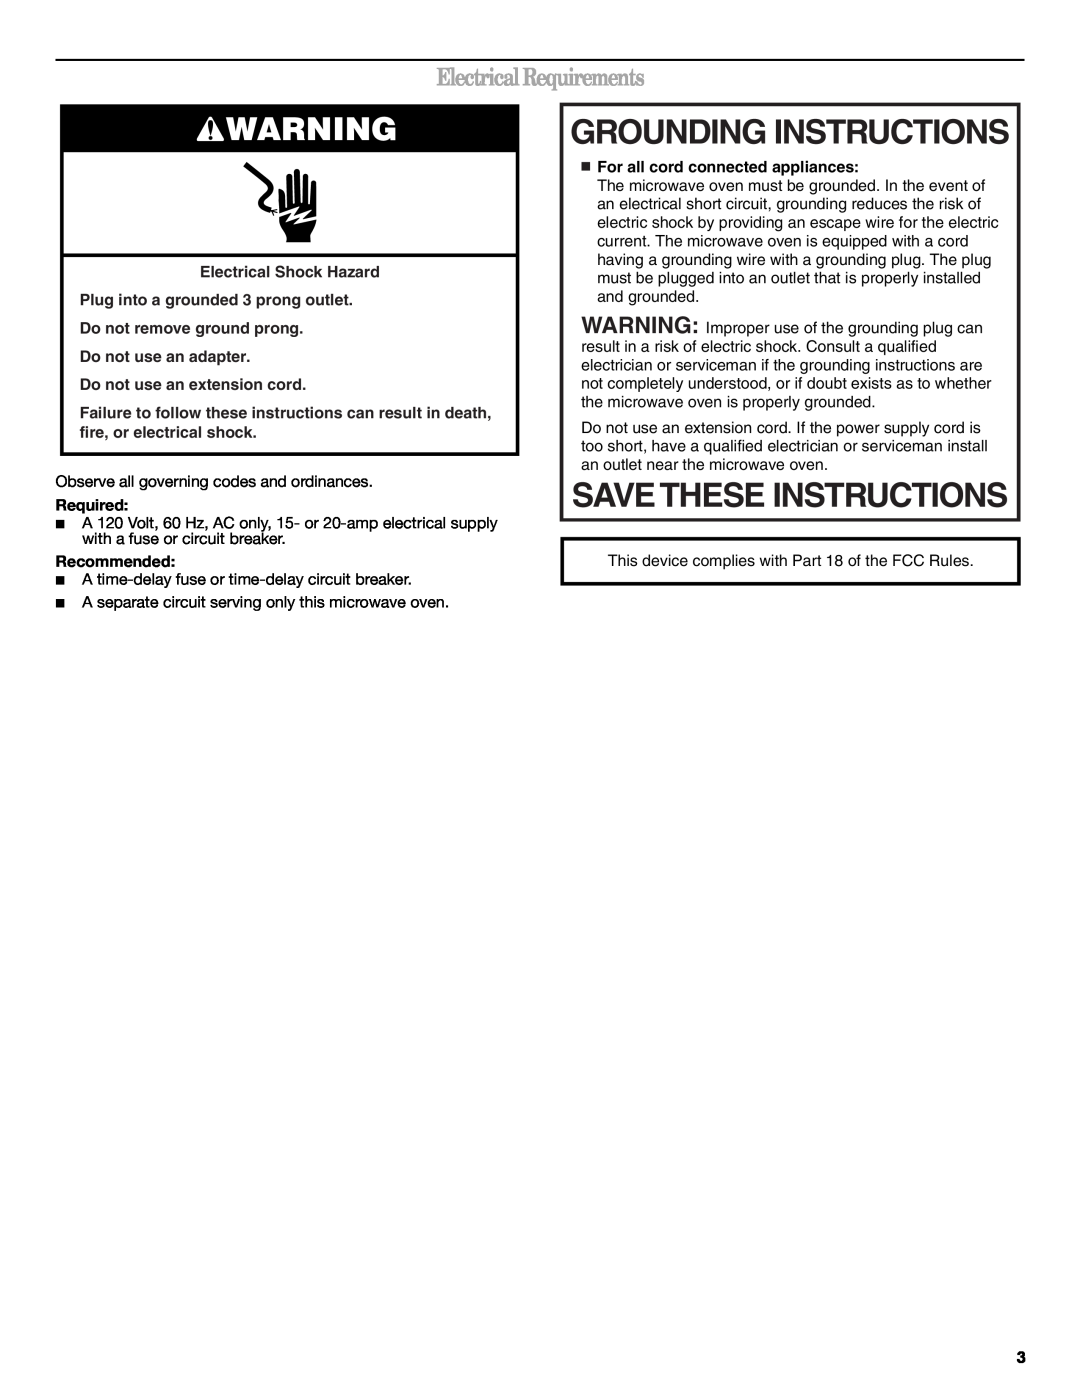 Whirlpool W10270332A Grounding Instructions, ElectricalRequirements, Required, Recommended, Save These Instructions 